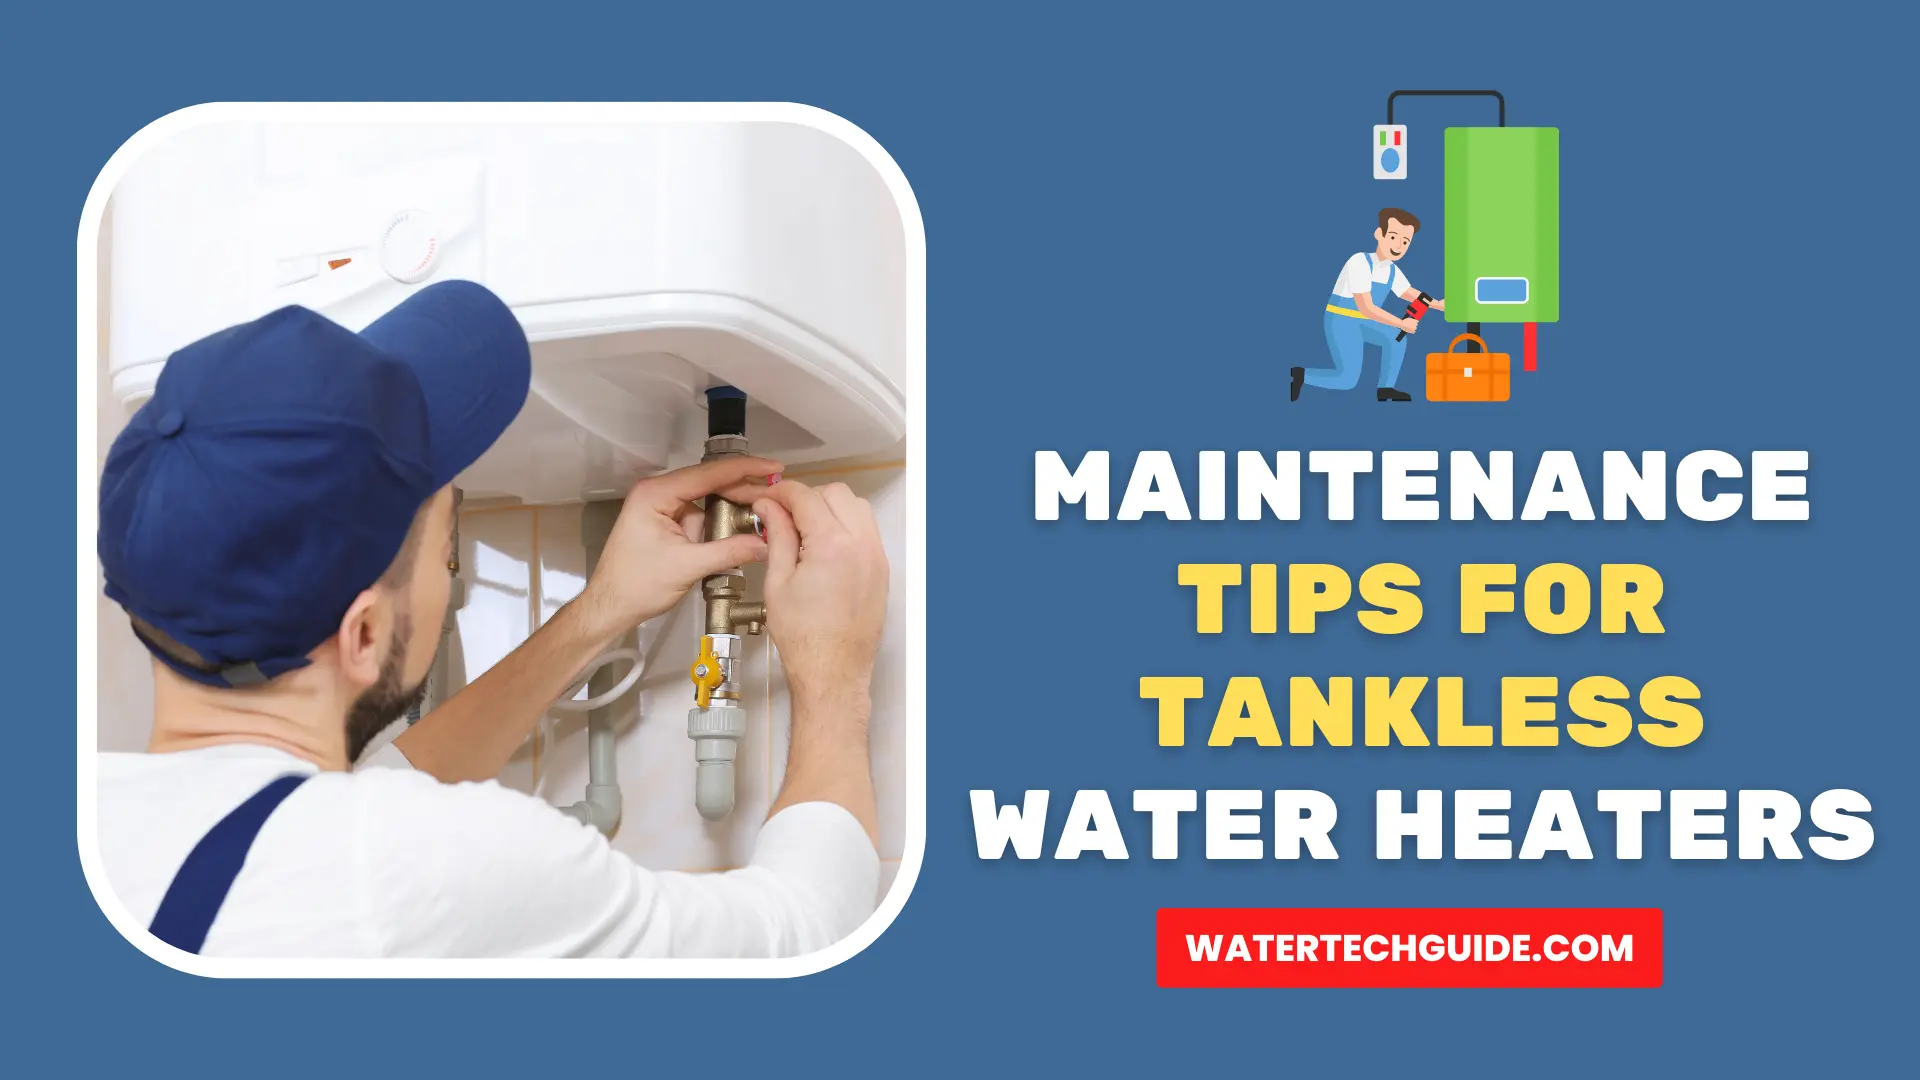 Maintenance Tips for Tankless Water Heaters